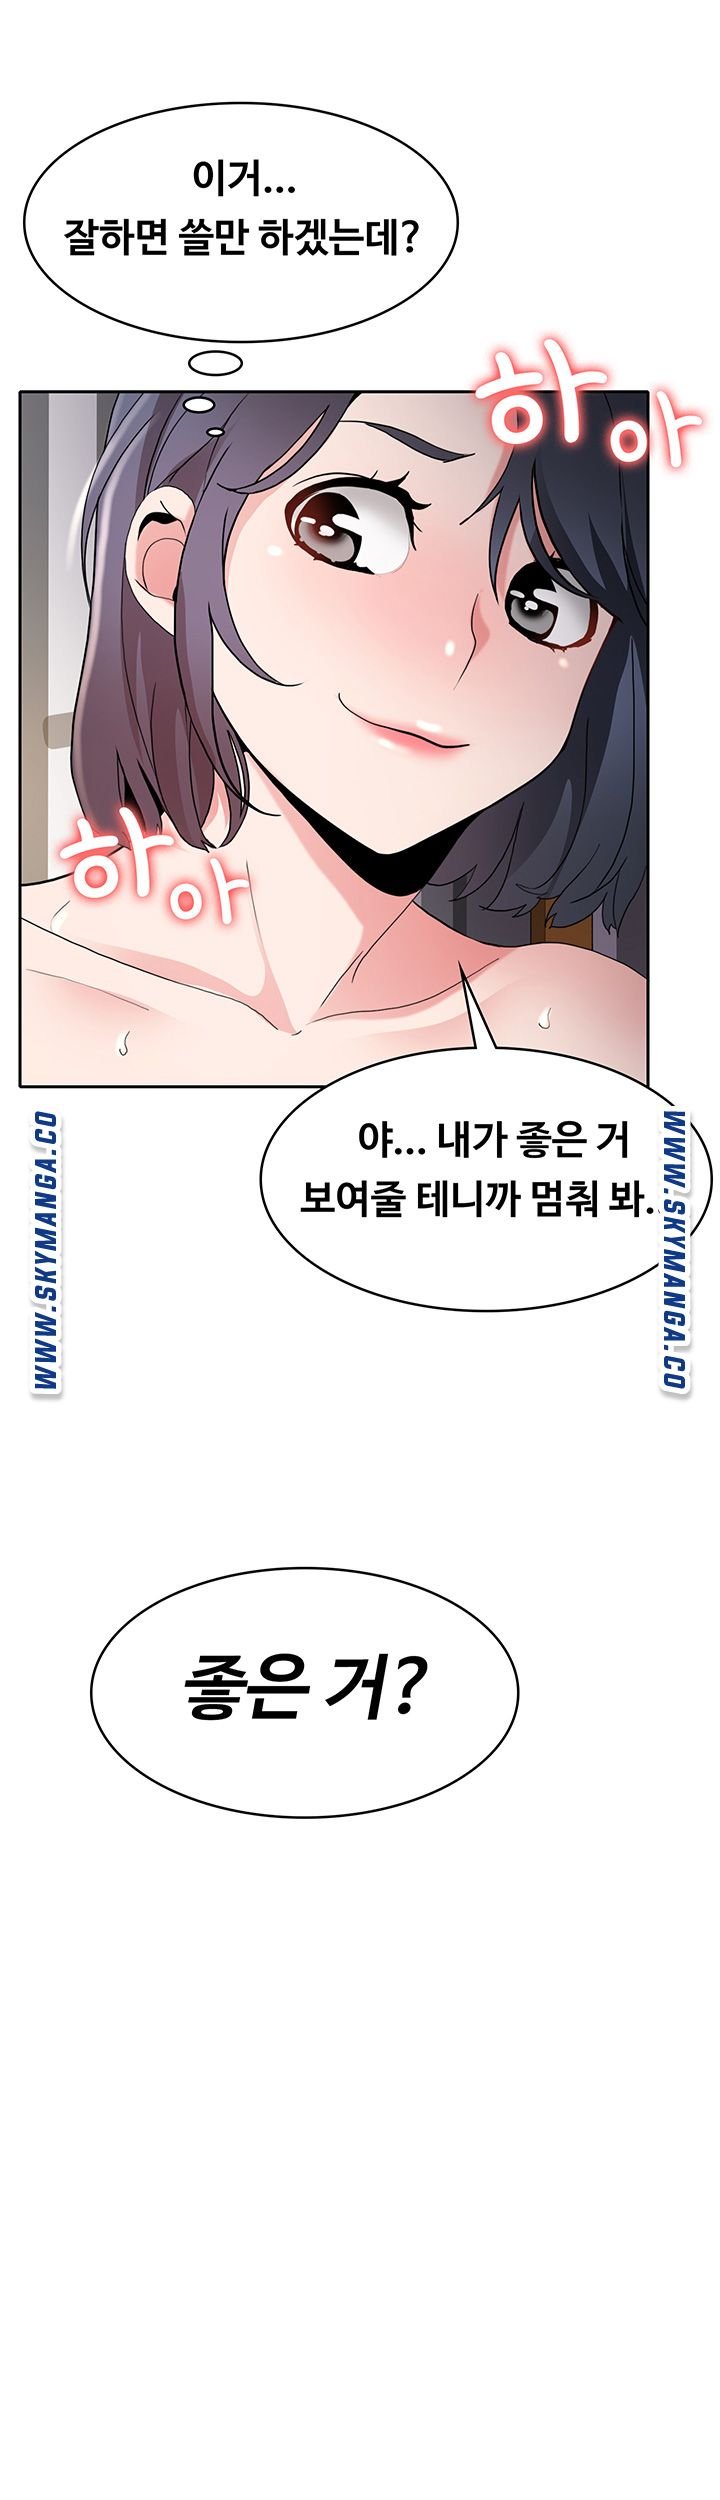 Wanna Service (Do You Want a Service?) Raw - Chapter 3 Page 25